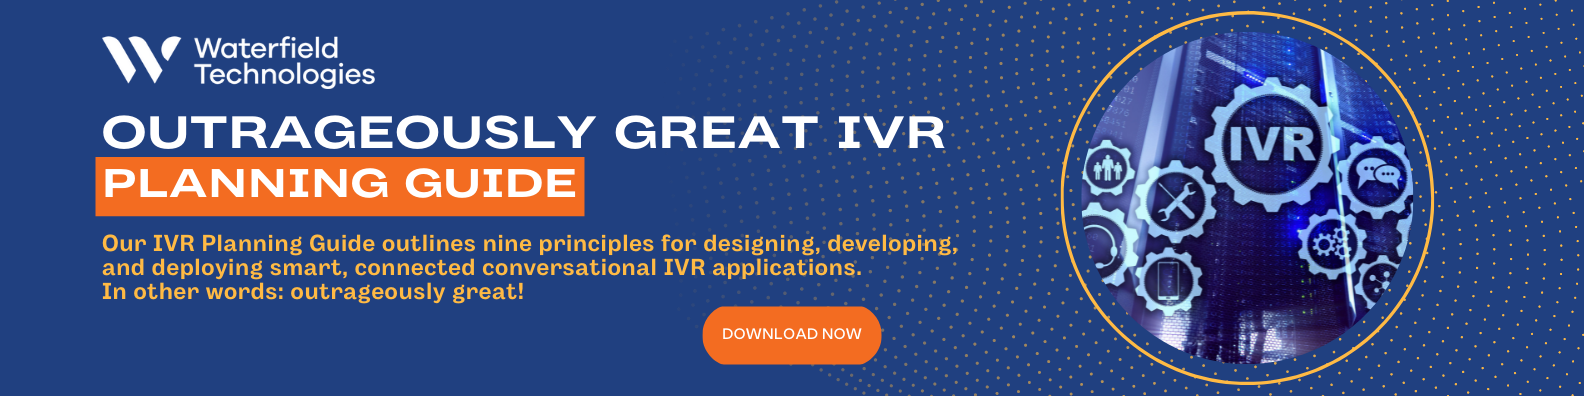 IVR Planning Guide - Native Ad (2)